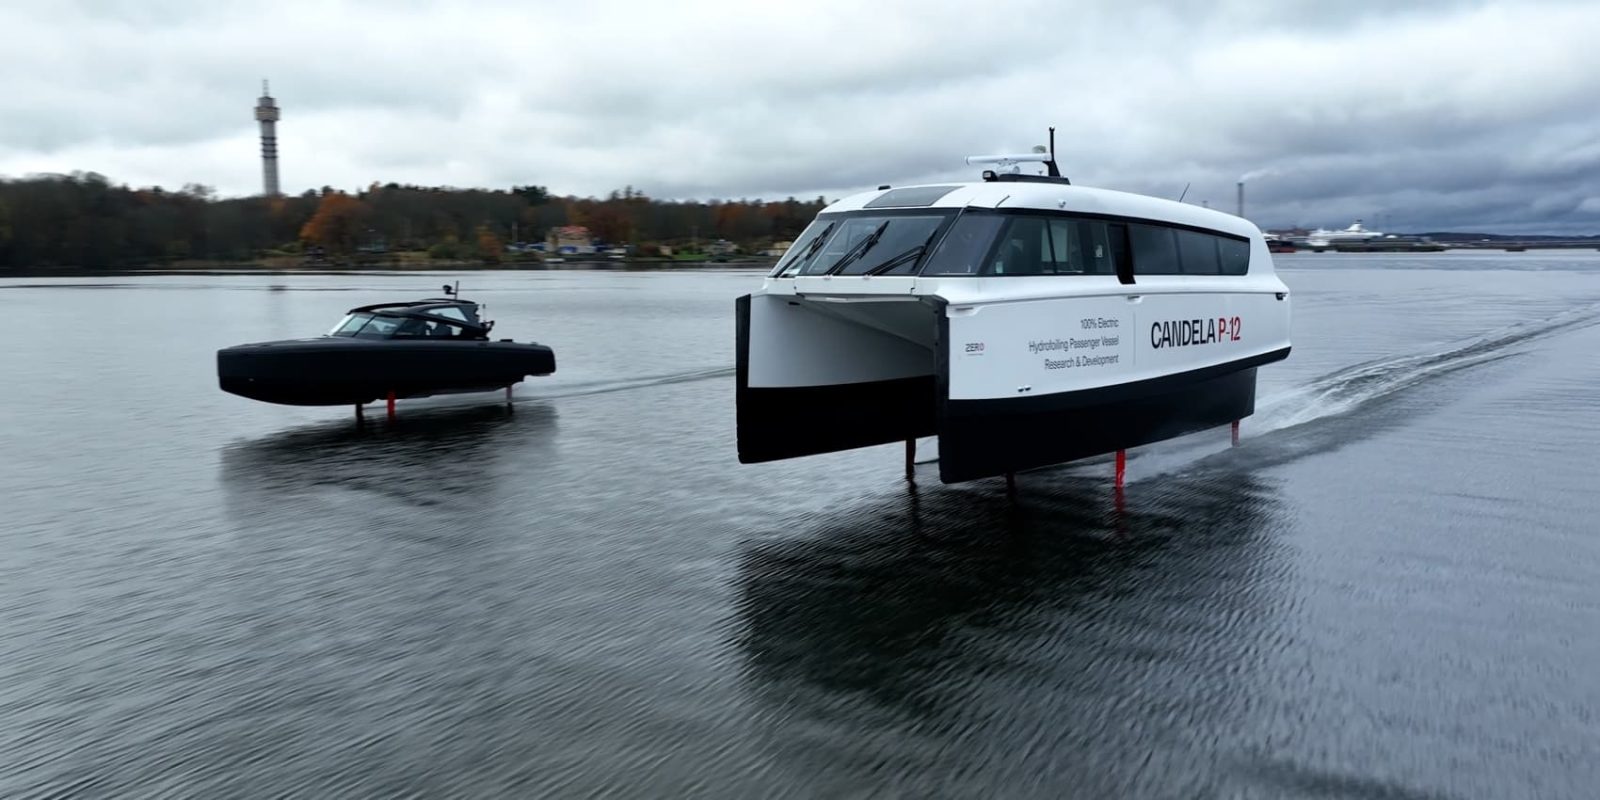 Electric Boats